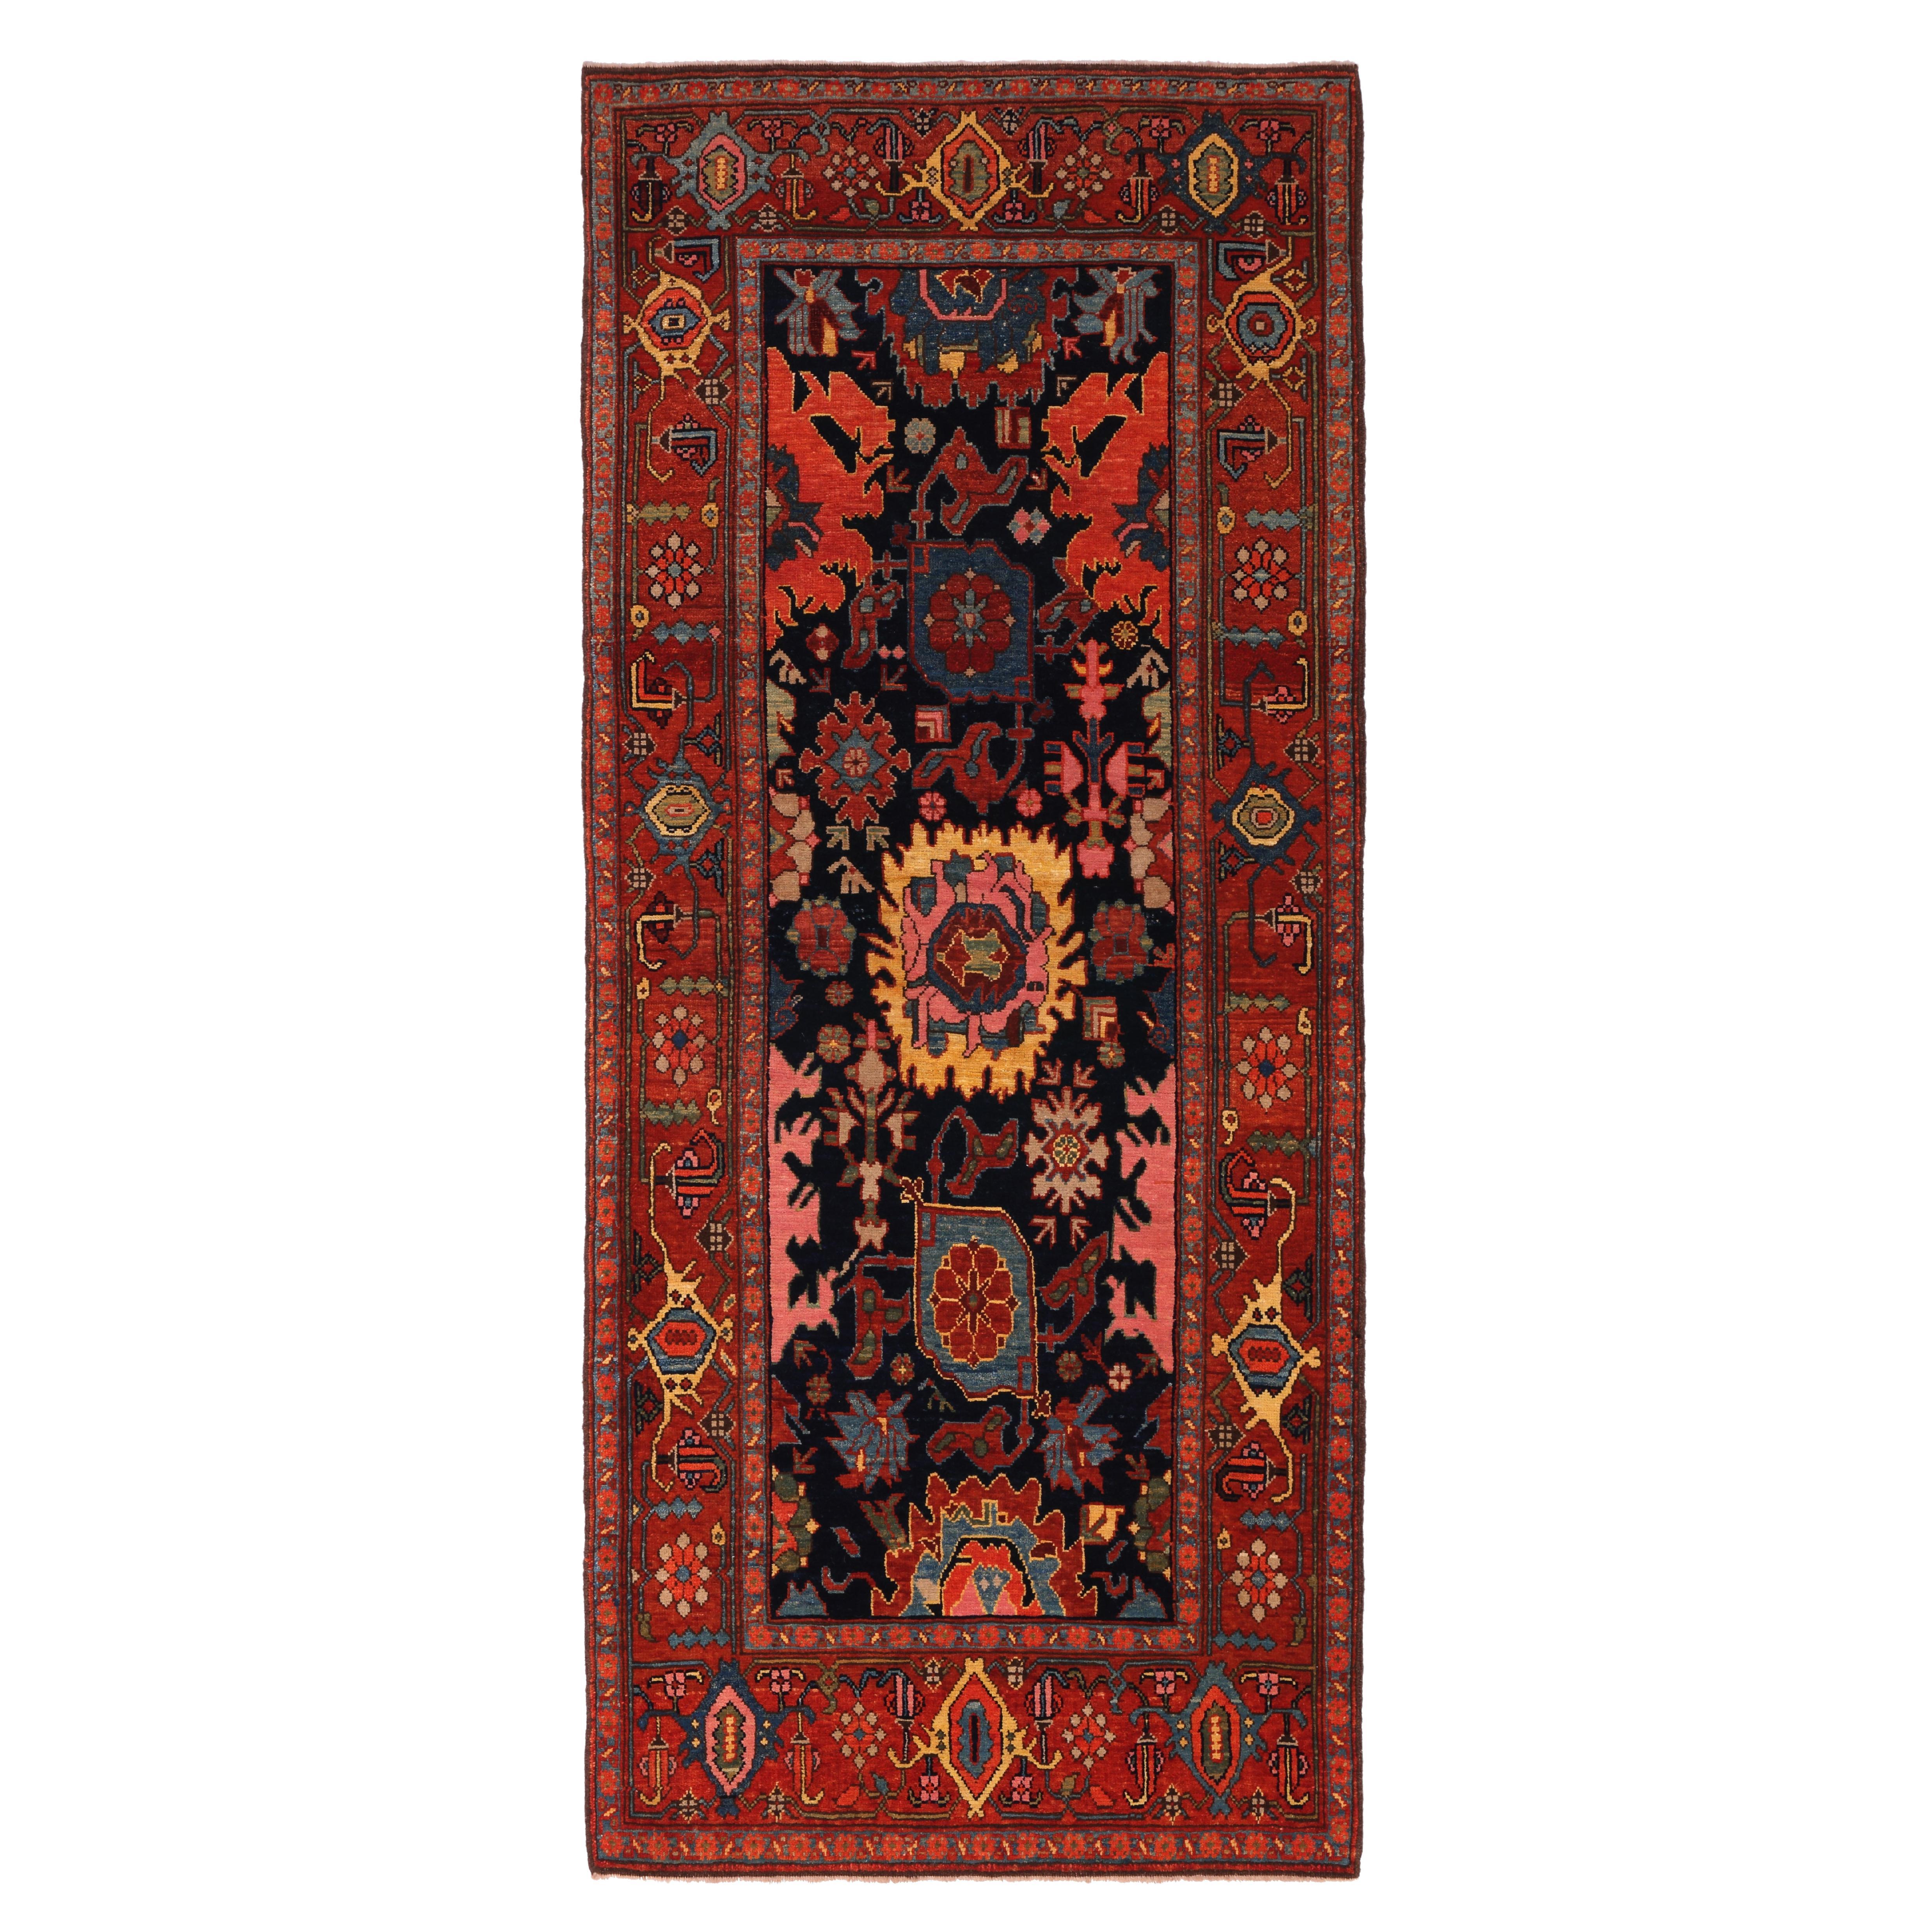 Ararat Rugs Palmettes and Flowers Lattice Rug Revival Carpet, Natural Dyed